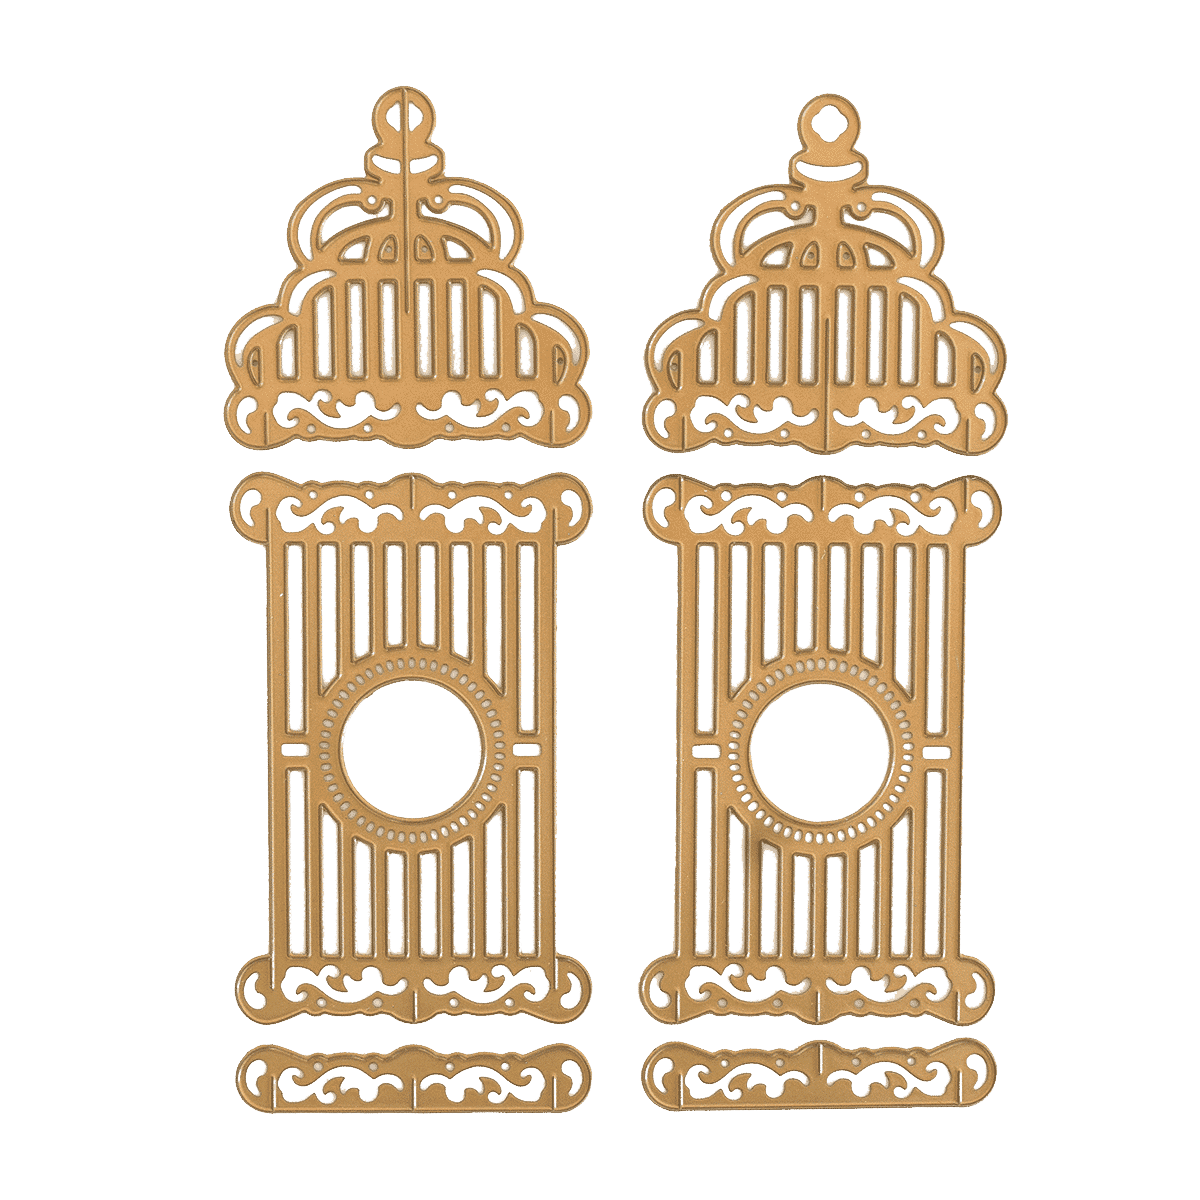 a pair of gold birdcages on a green background.